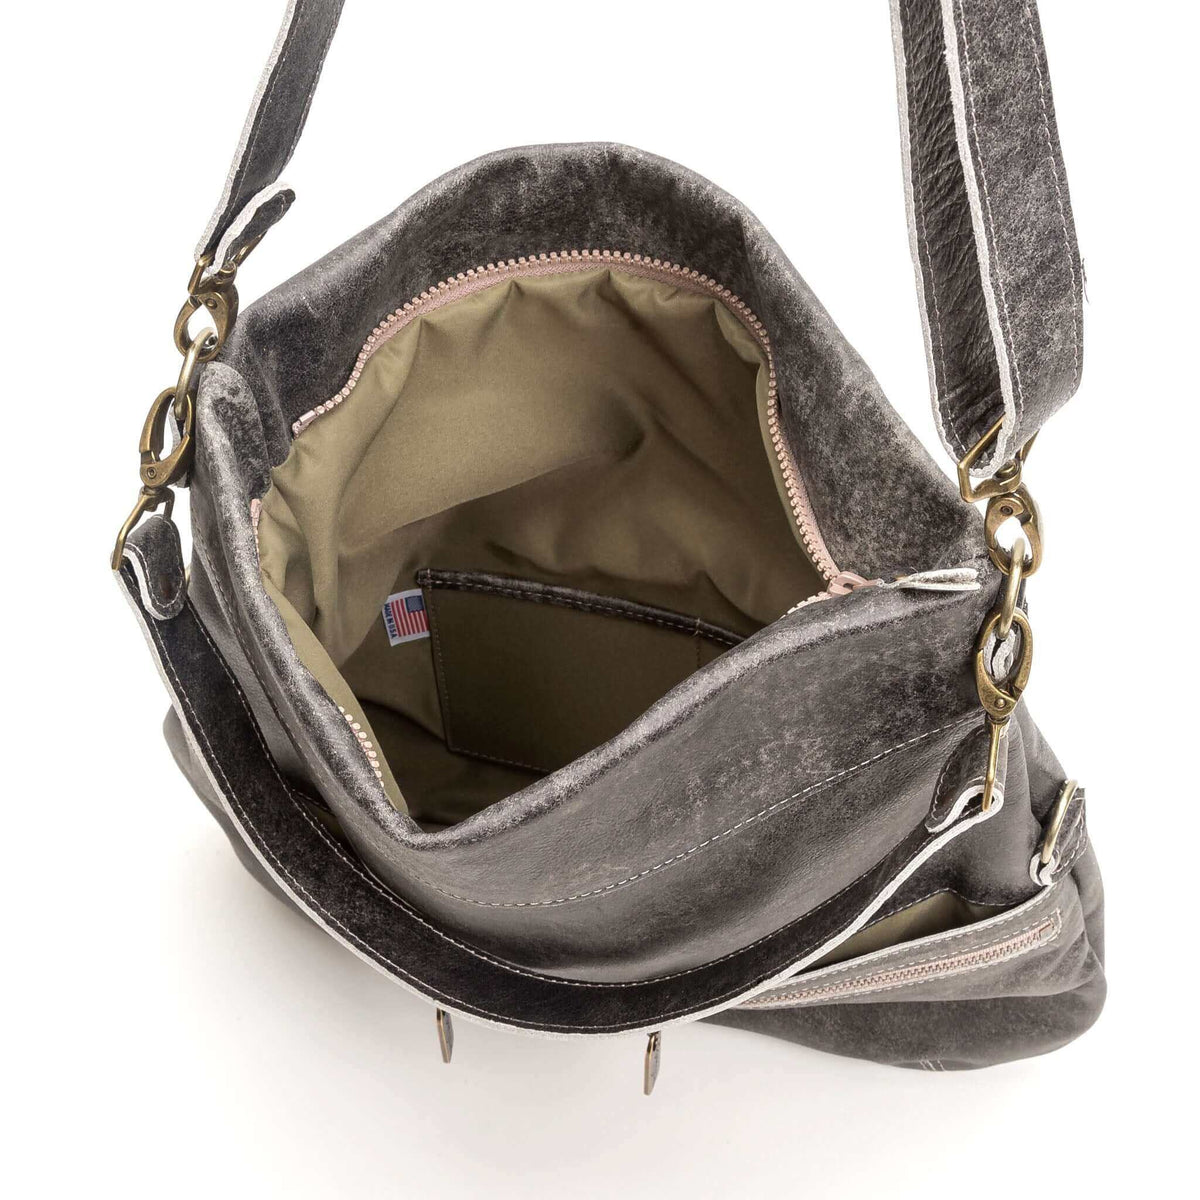 Lauren Convertible Crossbody Bag, Rustic Charcoal, Brynn Capella, backpack, made in the USA